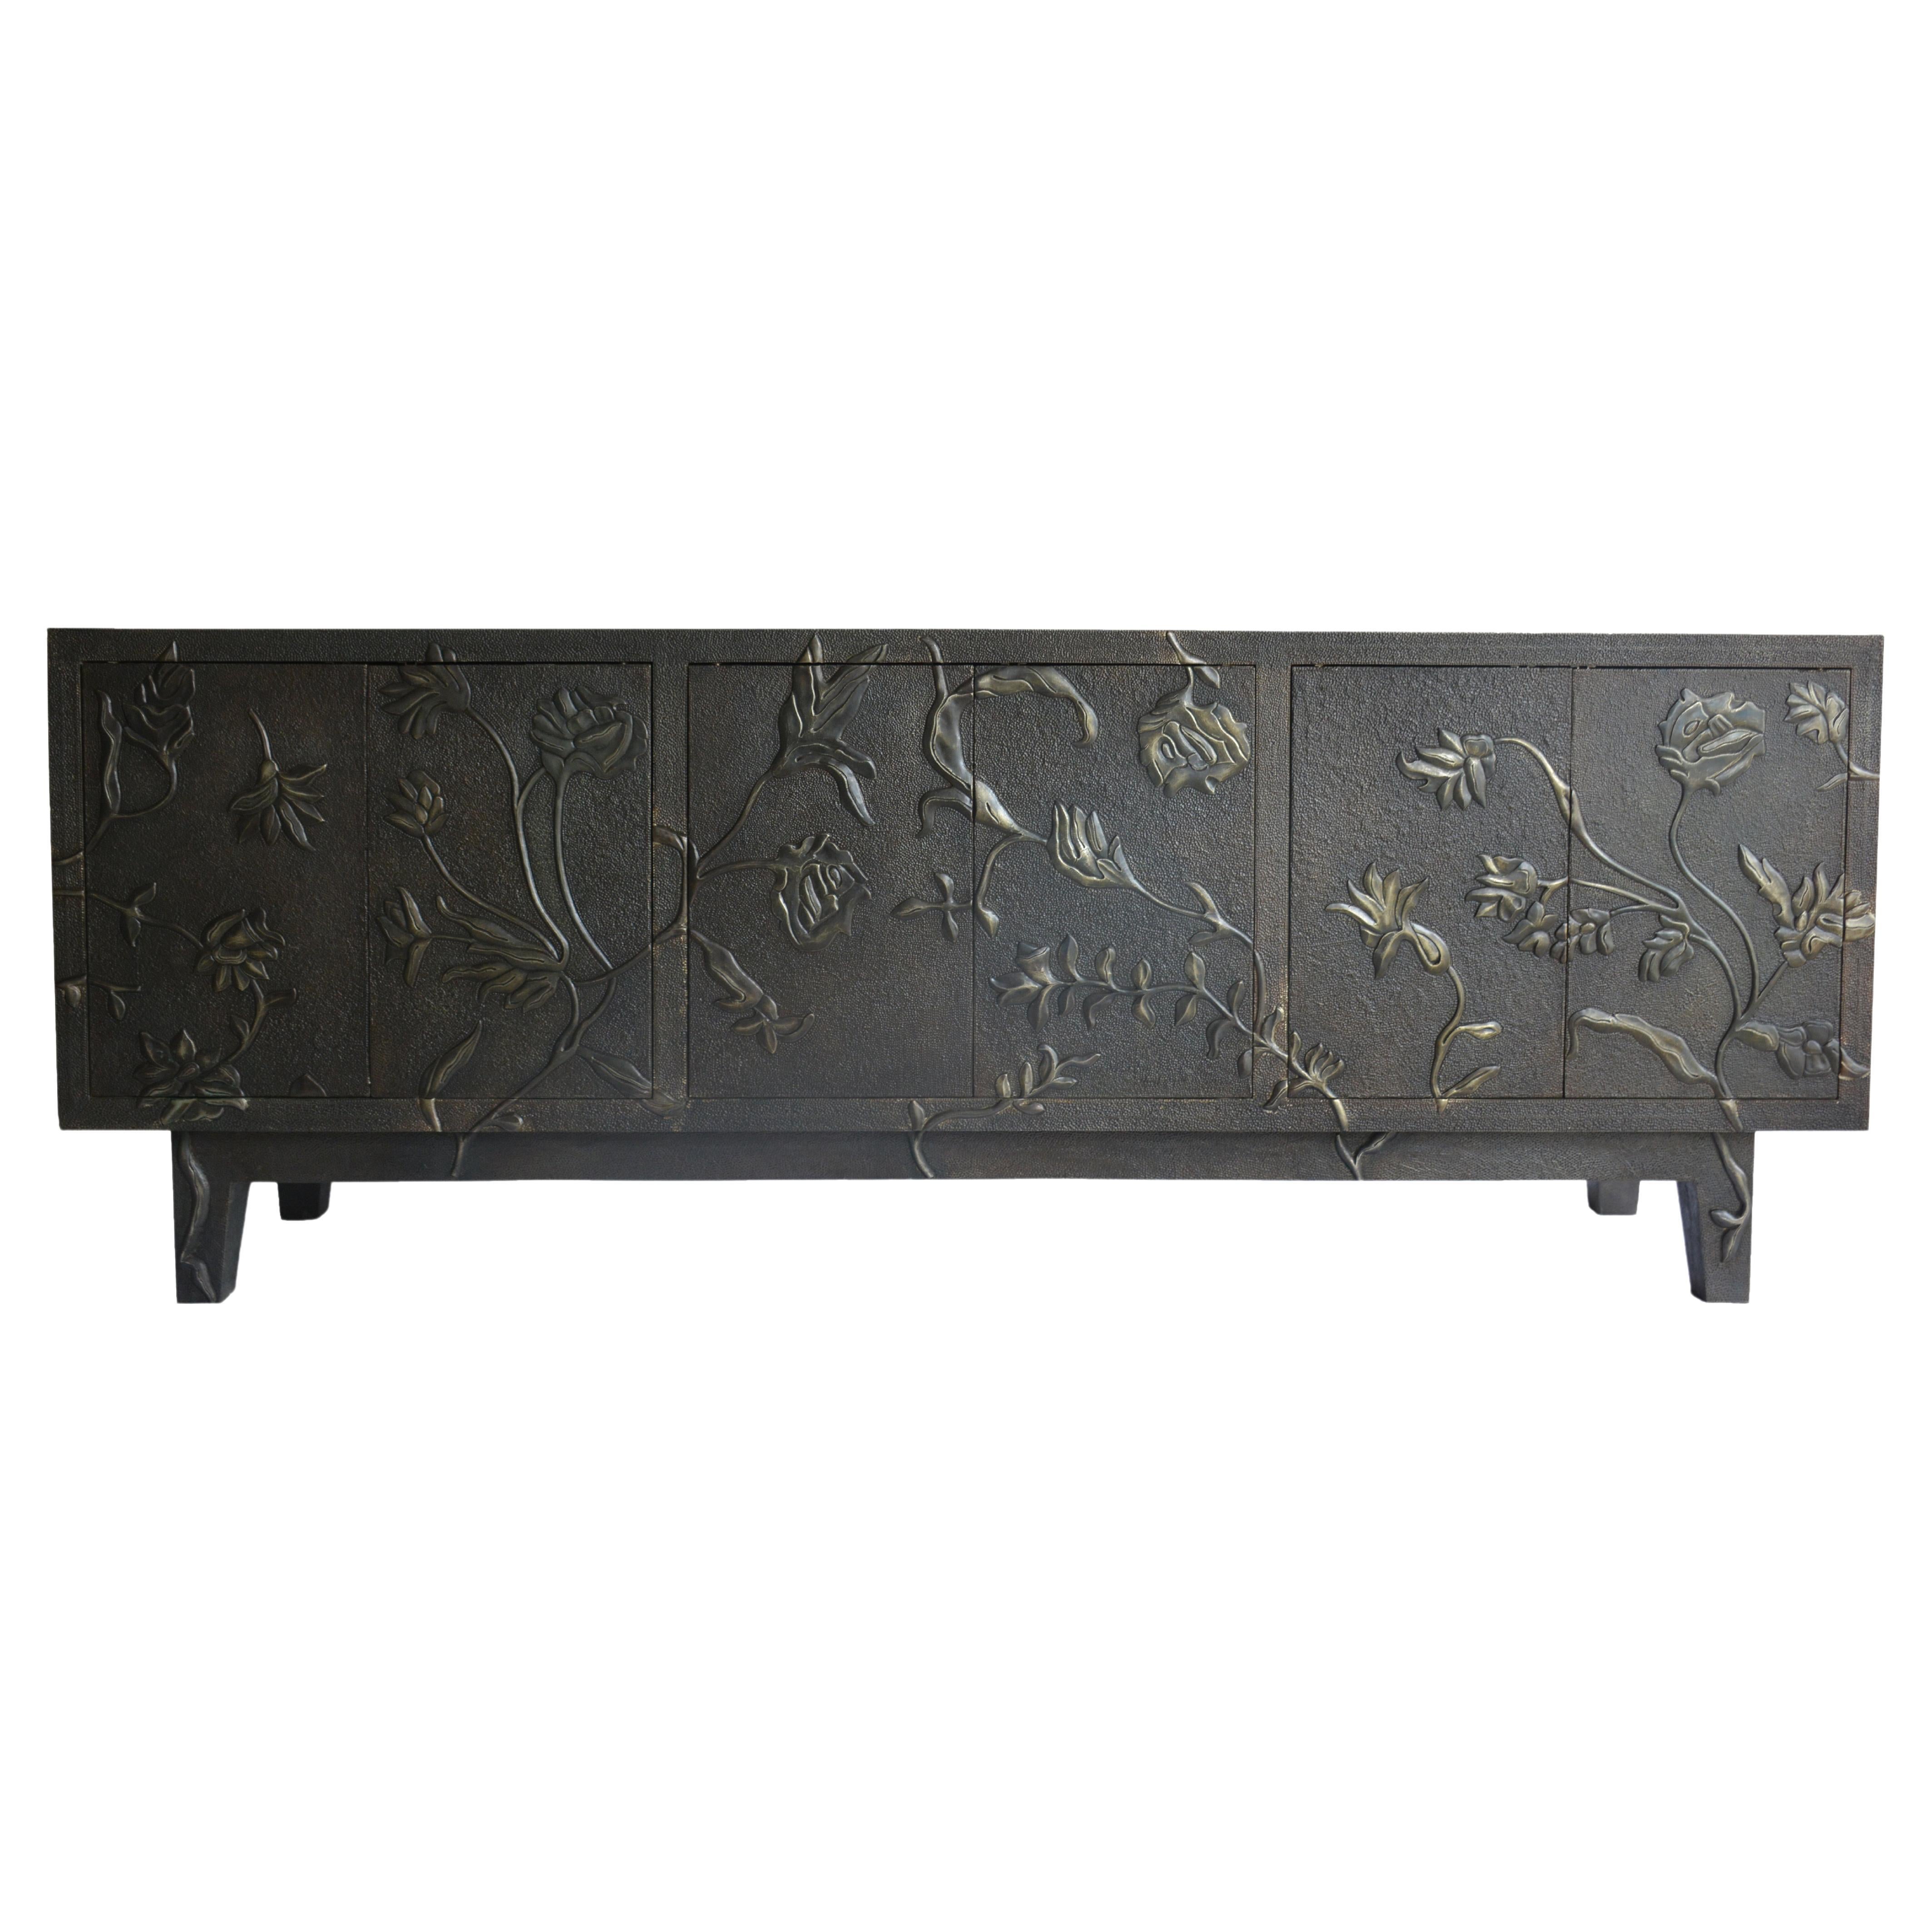 Floral Credenza in Antique White Bronze Clad Over MDF Handcrafted In India